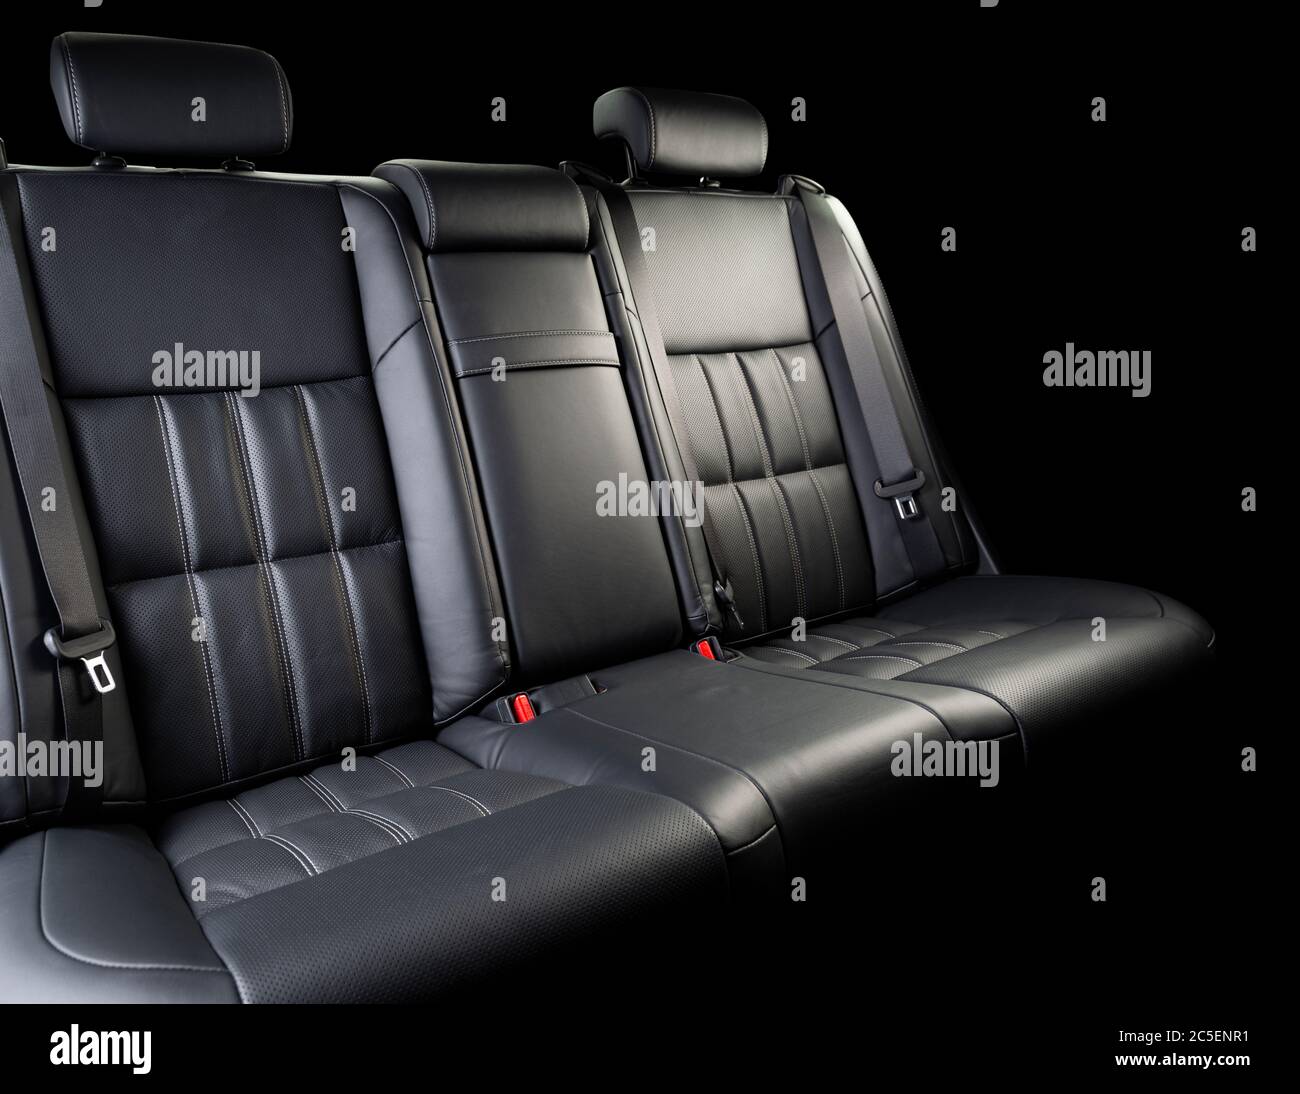 https://c8.alamy.com/comp/2C5ENR1/comfortable-leather-car-seat-black-perforarated-leather-car-seat-isolated-on-black-background-with-copy-space-comfortable-leather-car-seat-backseat-2C5ENR1.jpg